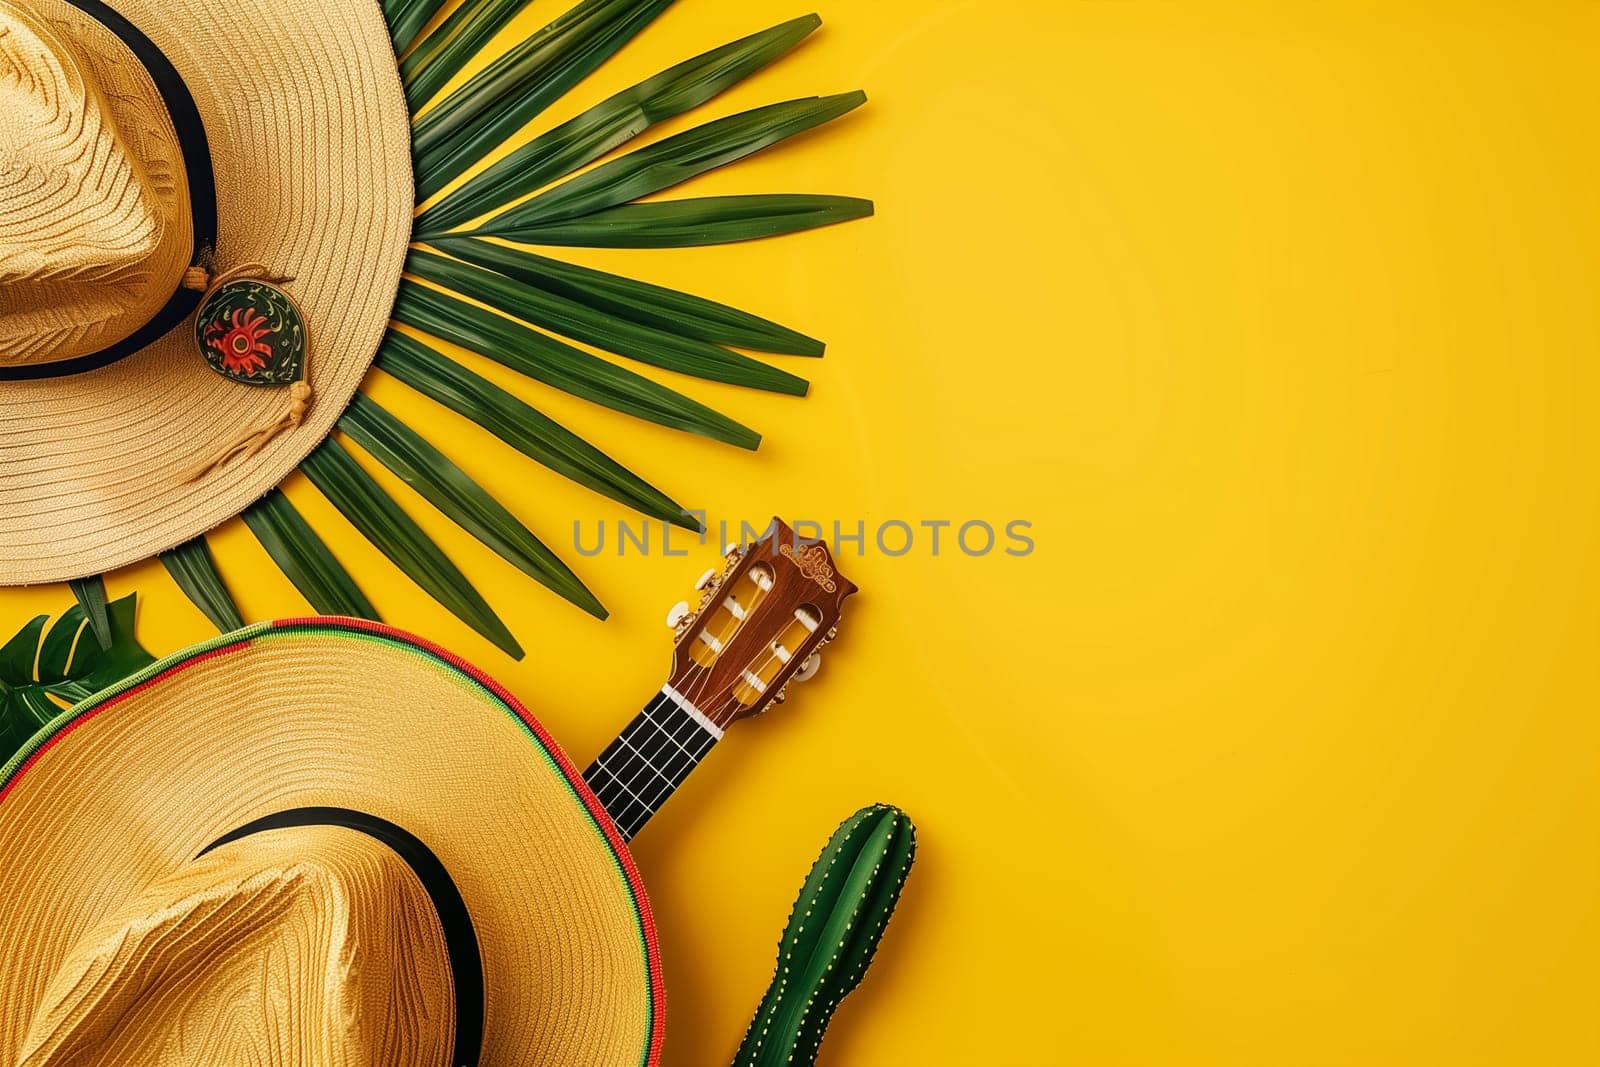 A festive display for Cinco de Mayo featuring a traditional Mexican serape, a sombrero, a guitar, cacti, a flower, and palm leaves.